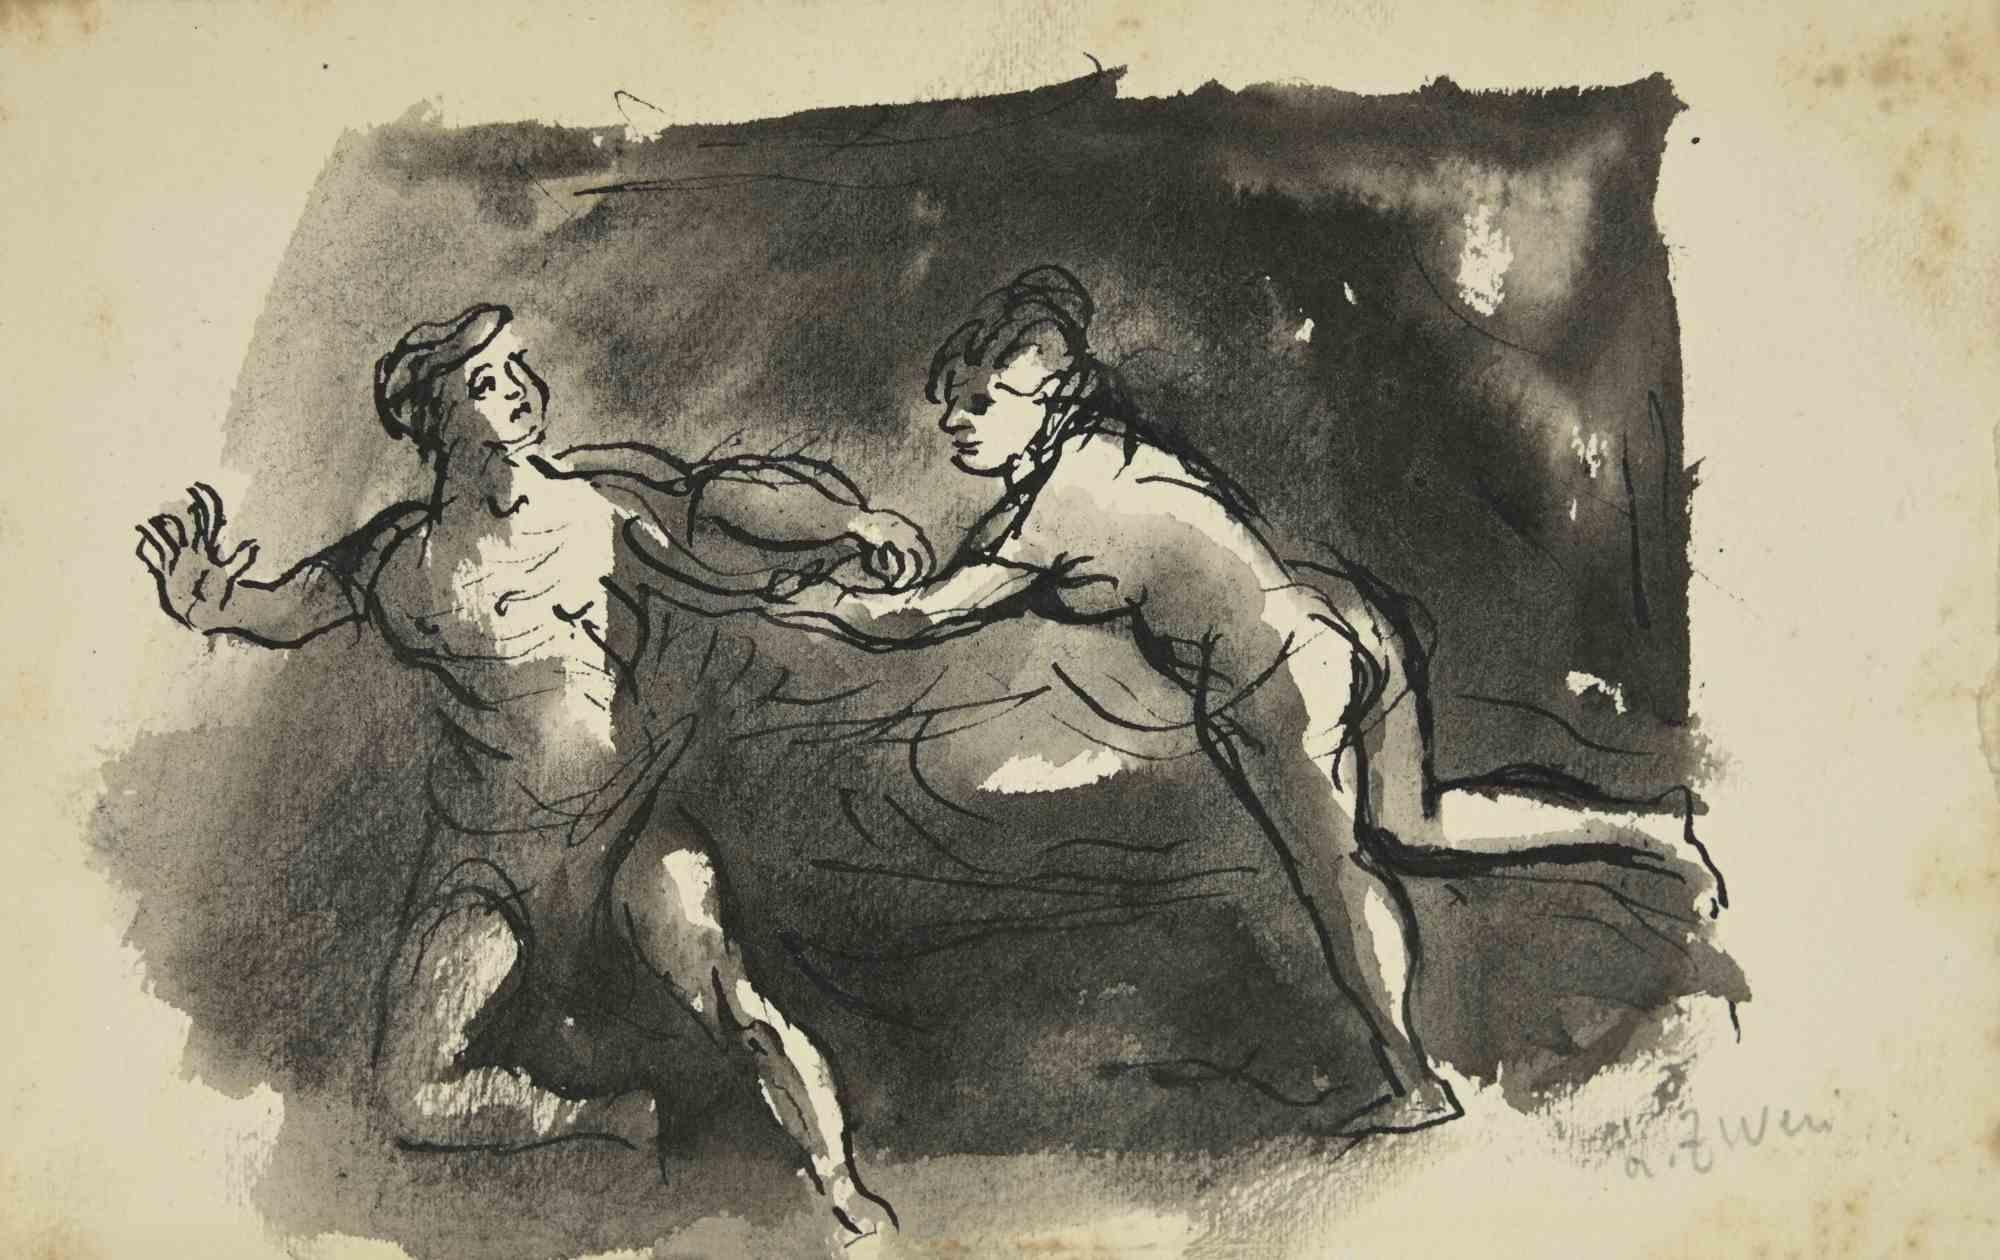 The Couple is a drawing realized by Alberto Ziveri in 1930s

Ink and Watercolor on paper.

Hand-signed.

In good condition with slight foxing.

The artwork is represented through deft strokes masterly.

Alberto Ziveri (Rome,1908 – 1990), the Italian